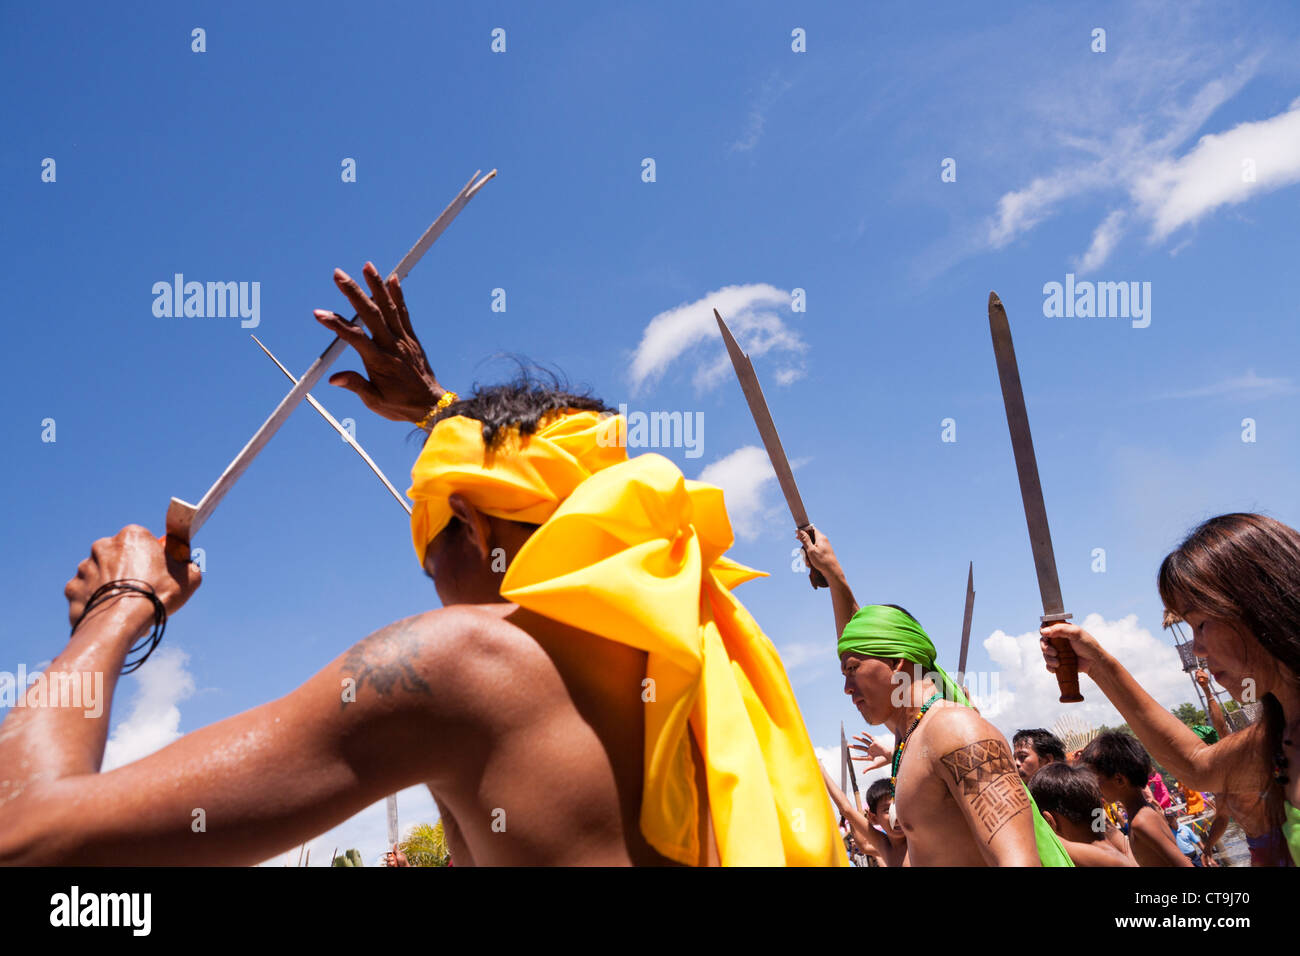 The native warriors celebrate victory and the death of Magellan at the Battle of Mactan reenactment, Lapu-Lapu City, Philippines Stock Photo